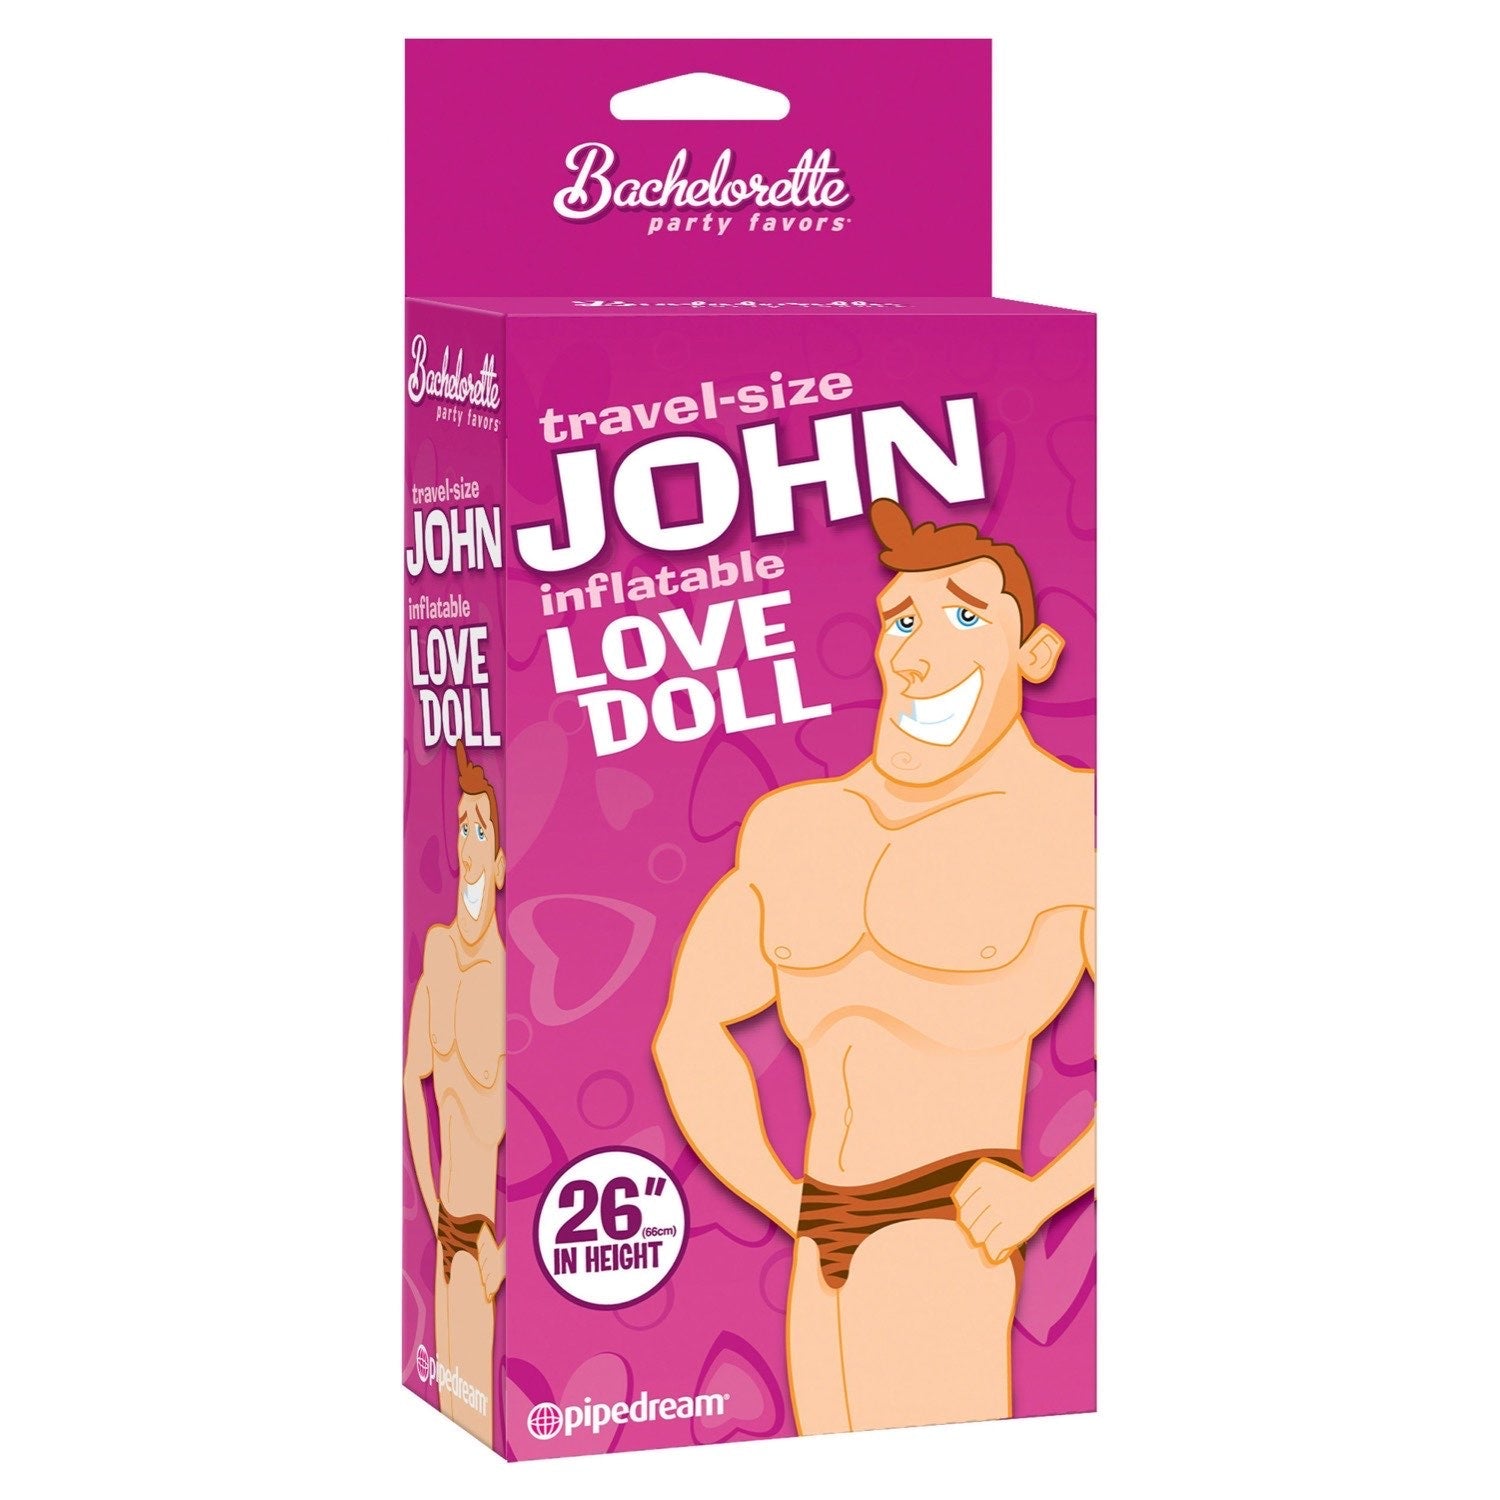 Bachelorette Party Favors Travel-size John - Miniature Inflatable Male Love Doll by Pipedream